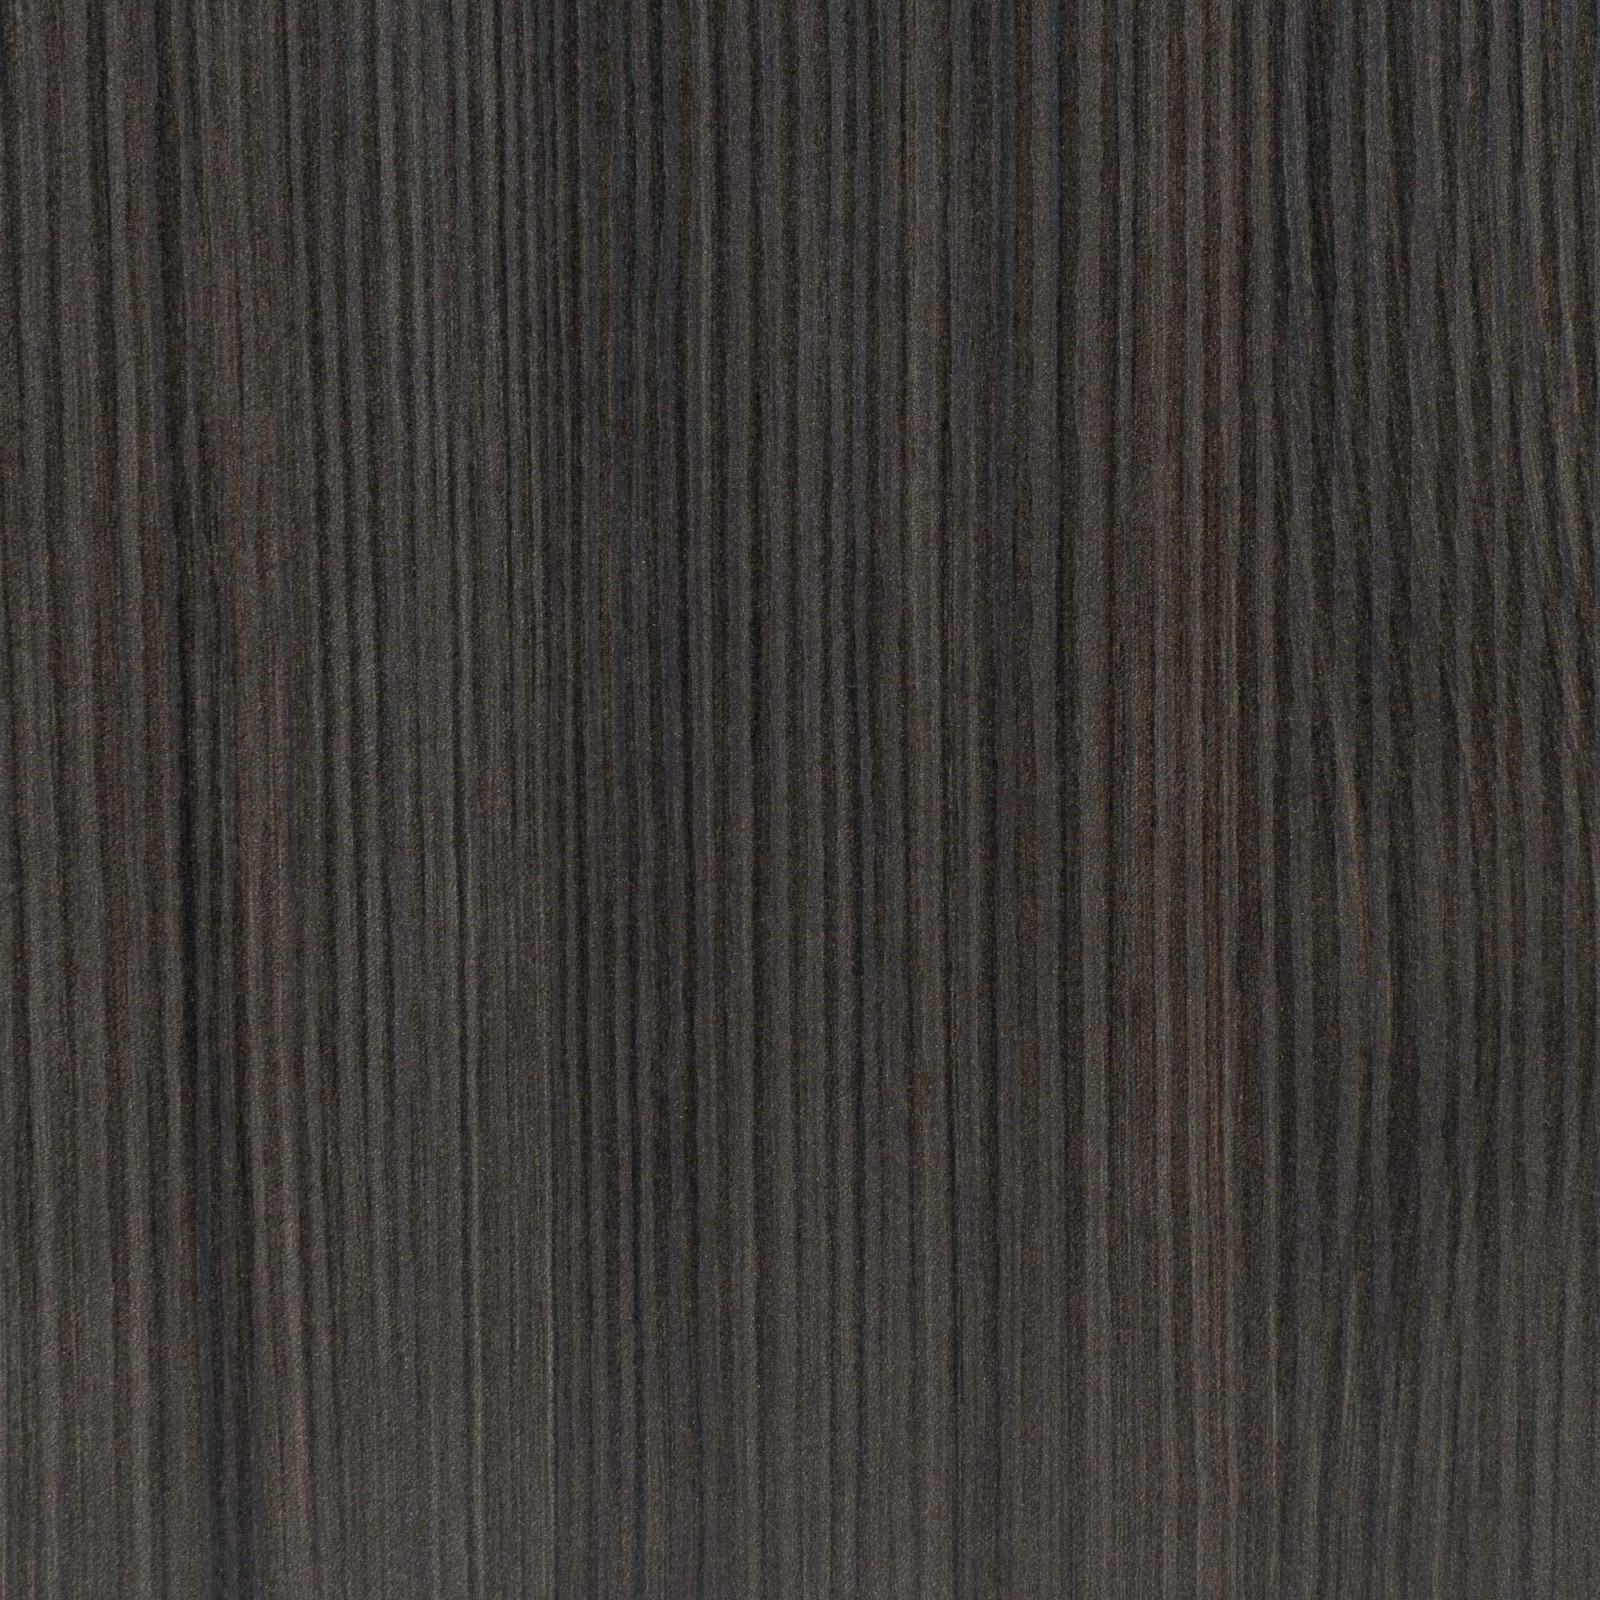 Mod Cabinetry Naturals Express Laminate Gregio Notte